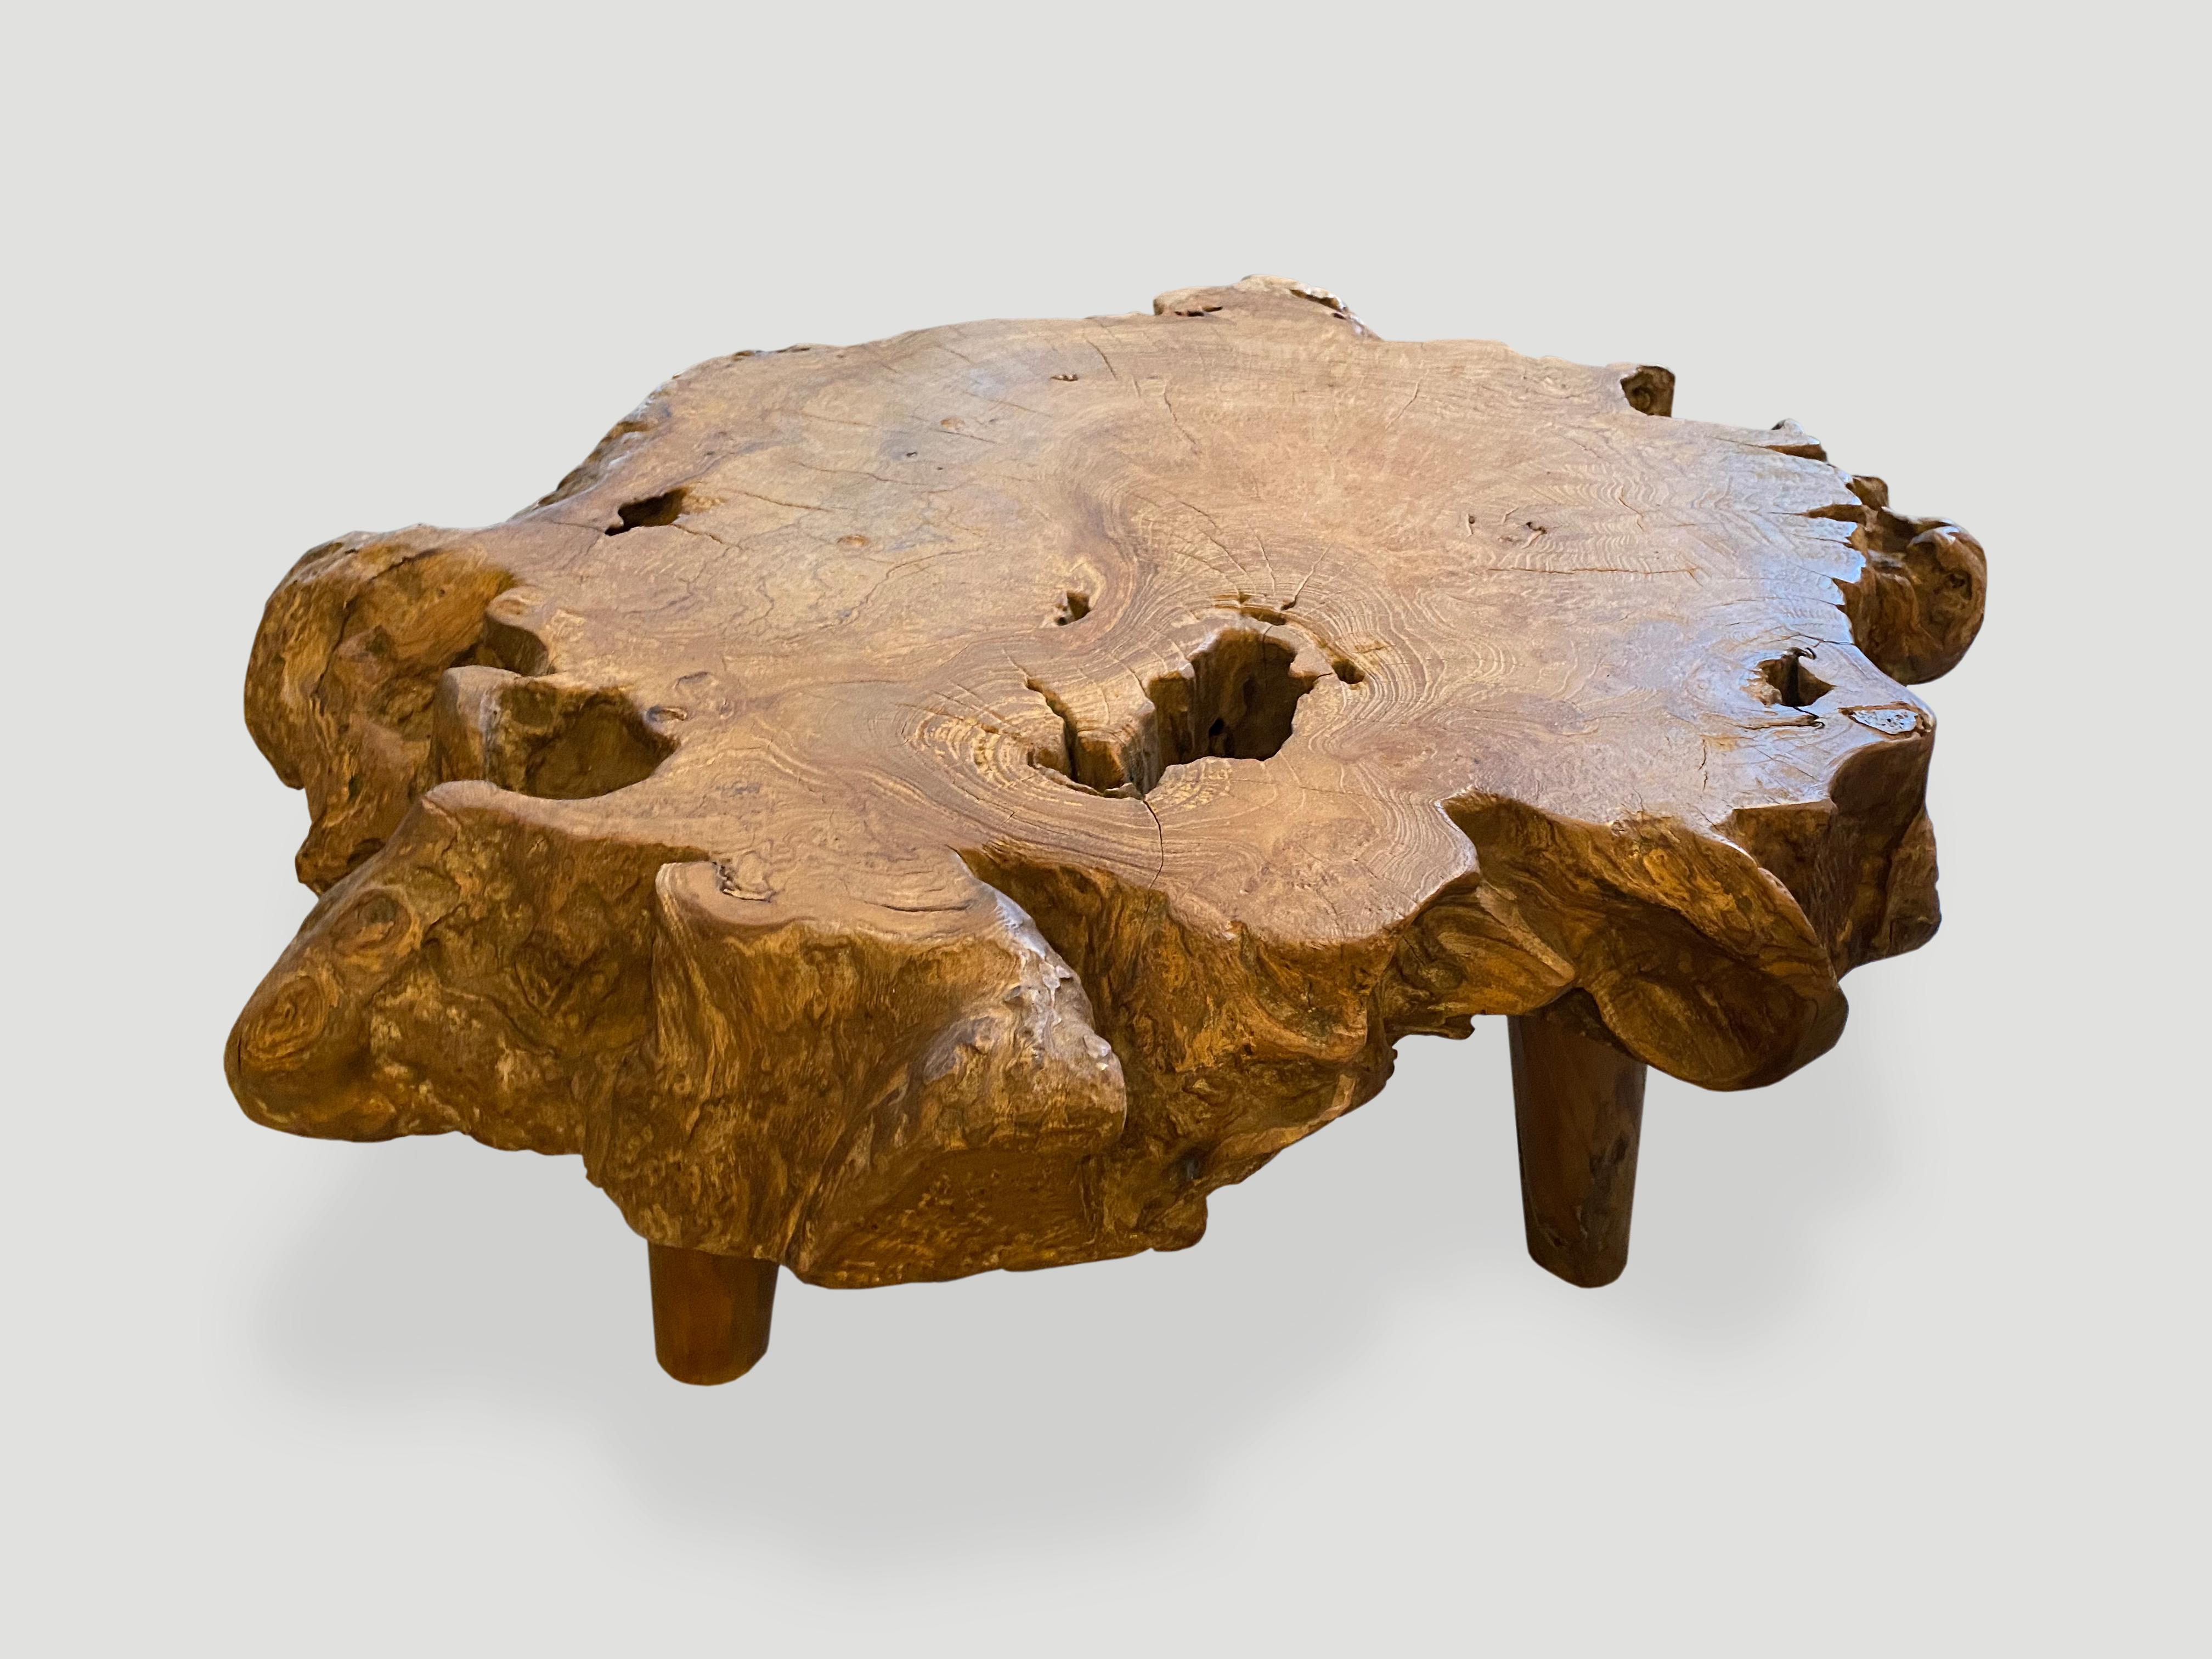 Impressive four inch top reclaimed teak root coffee table or side table. It’s fascinating how Mother Nature produces these logs with such beautiful patterns and markings throughout. A blend of organic and midcentury. We polished the wood to enhance